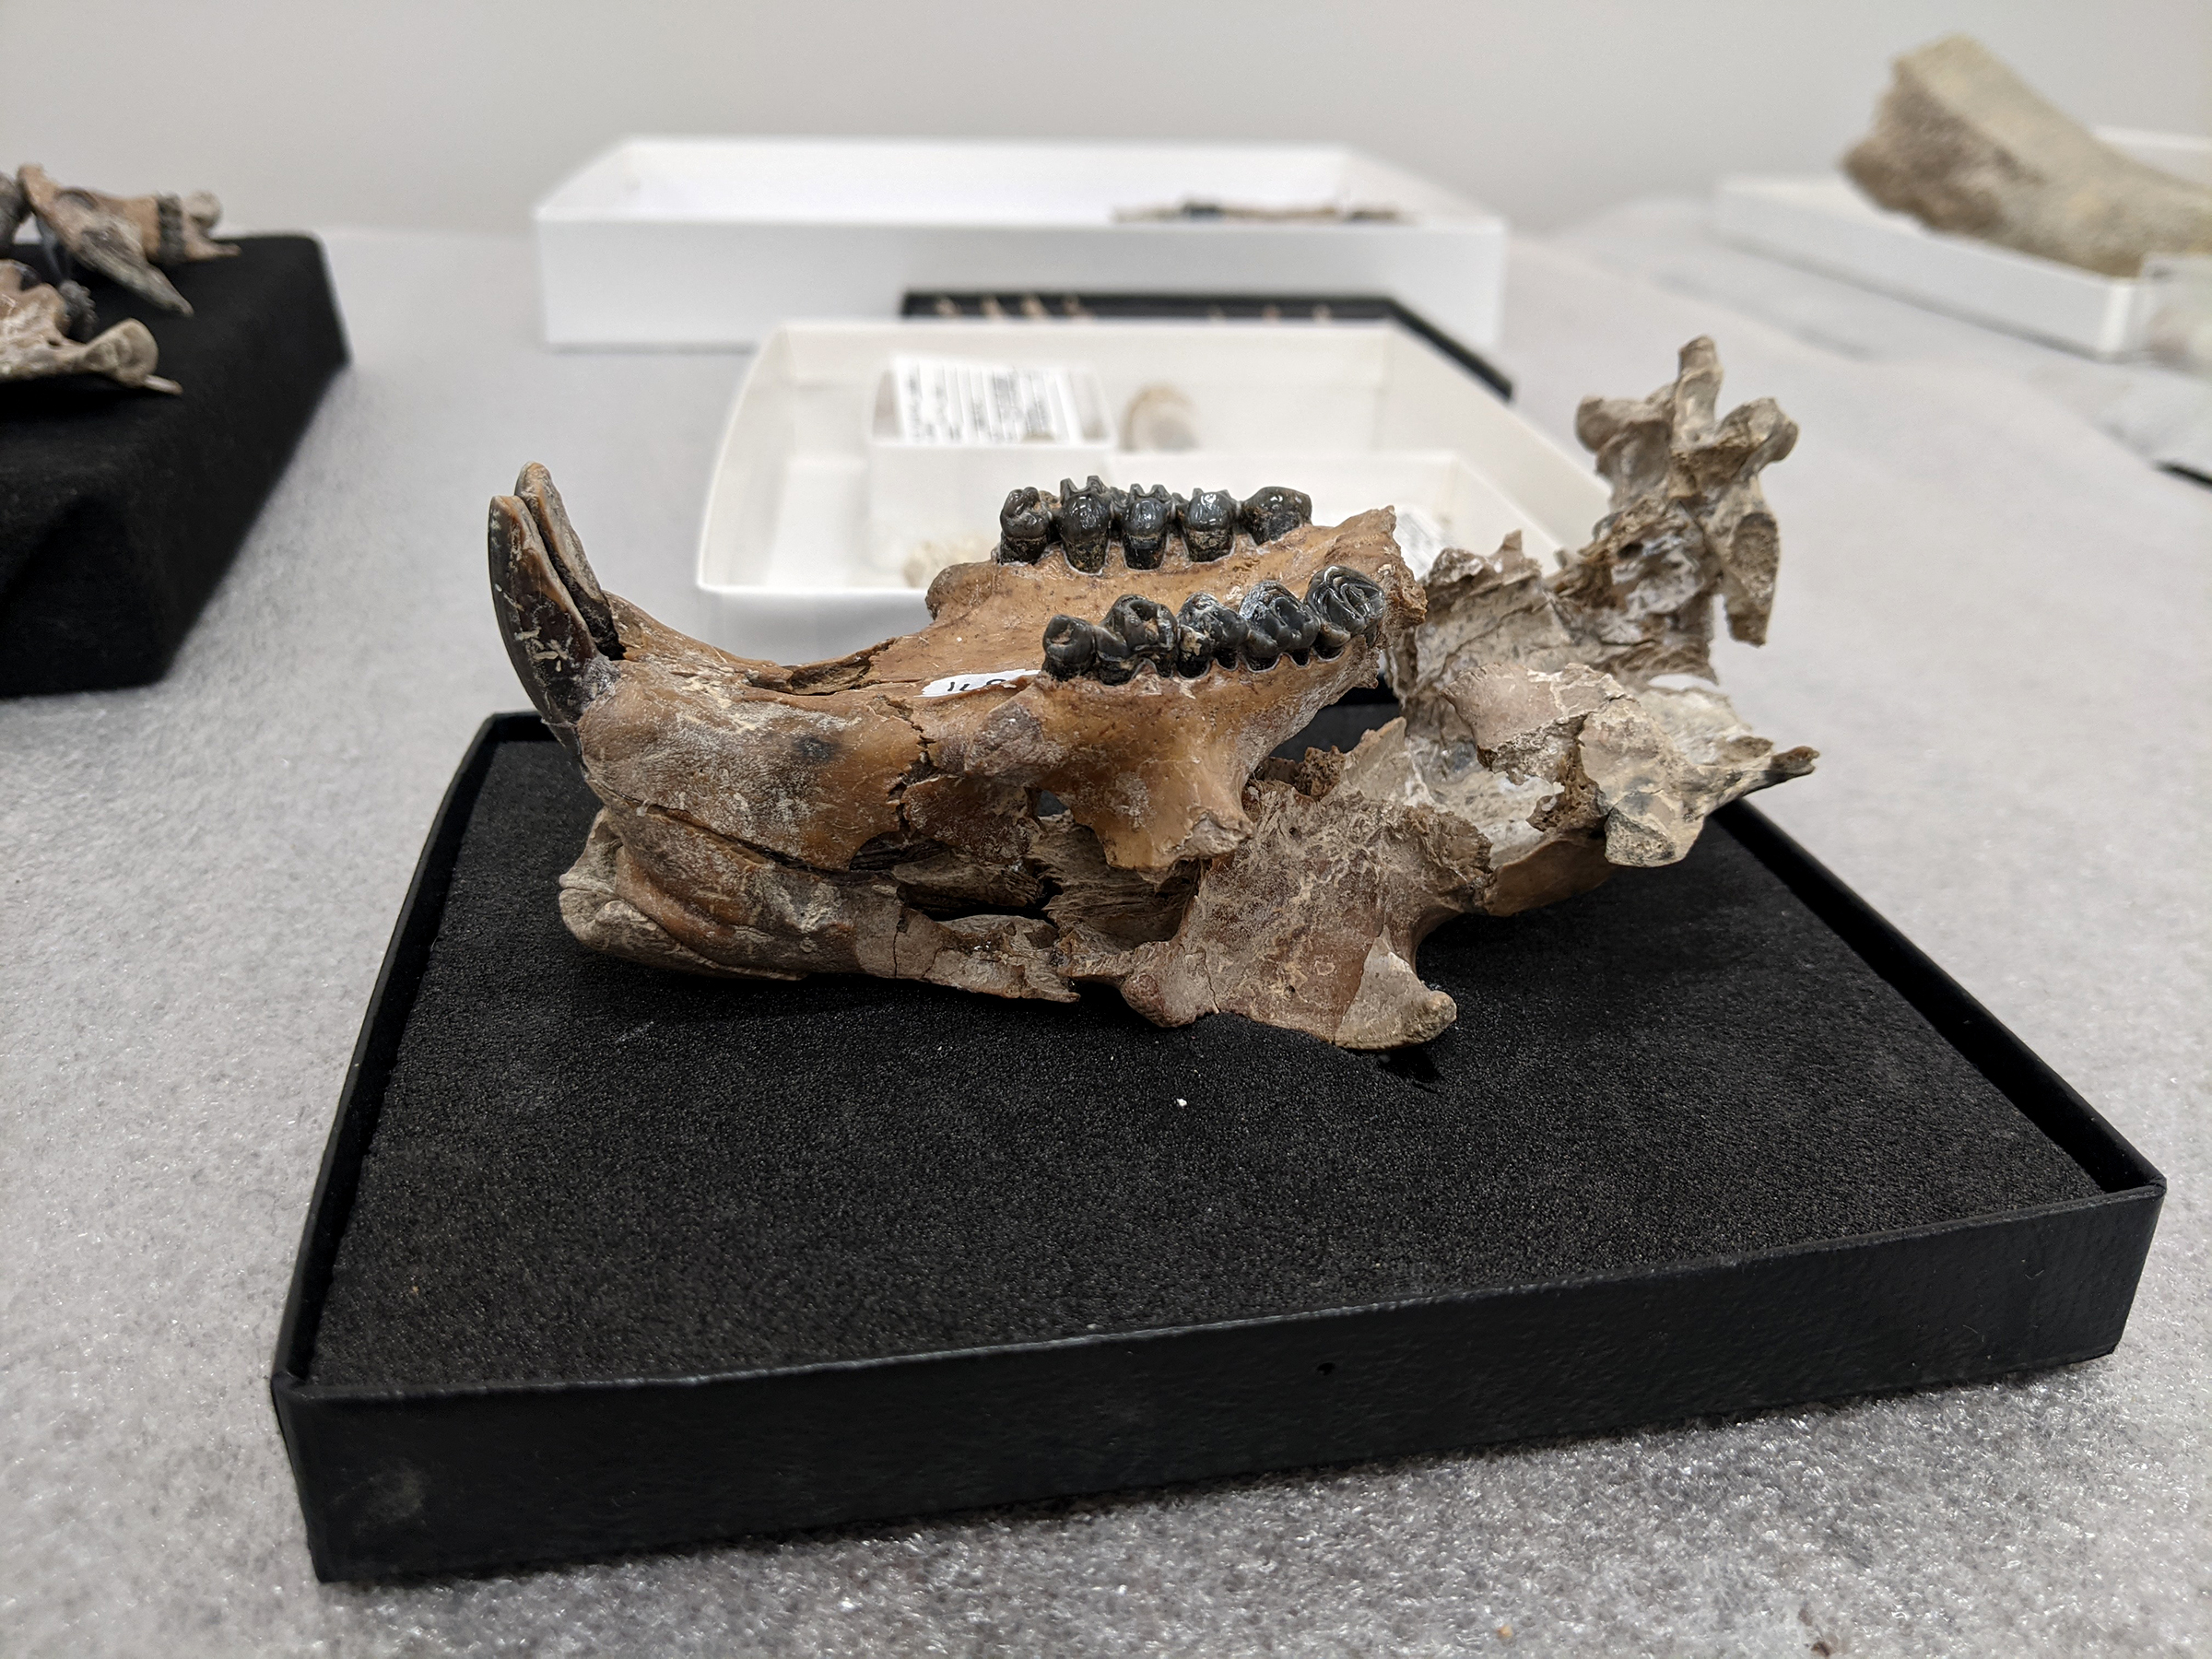 Fossil skull of an extinct giant marmot with long incisors and two rows of five black colored teeth. Photographed upside down on a square piece of thick black foam, with five other boxes of specimens in the background on white foam. The bones have the color of brown weathered rock.